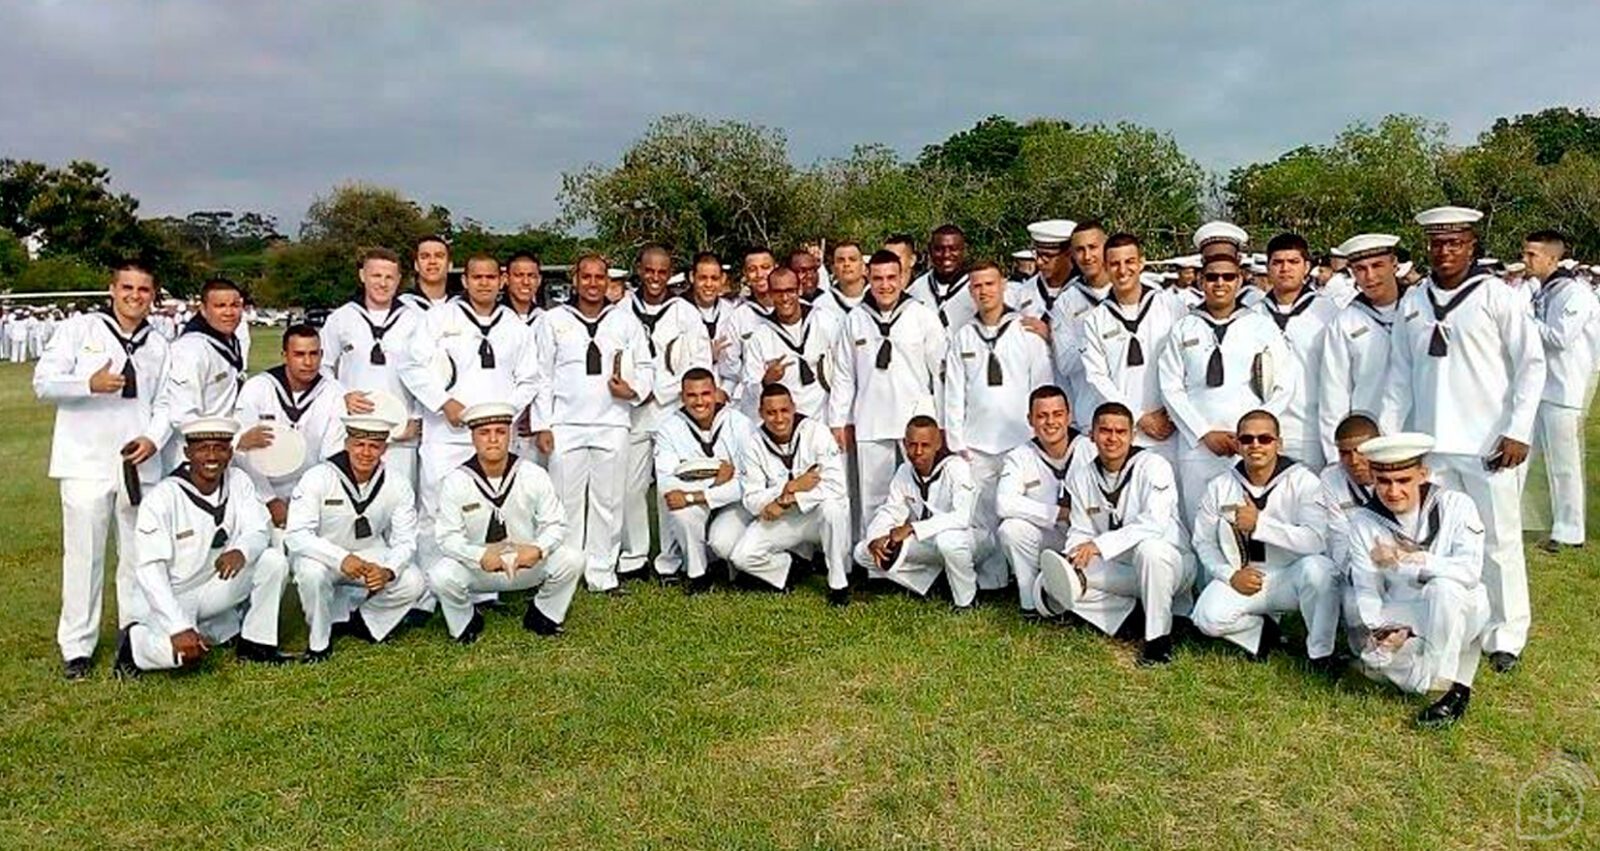 Featured photo: Class of sailors who, in 2017, presented the suggestion to change the uniform - Image: Personal Archive